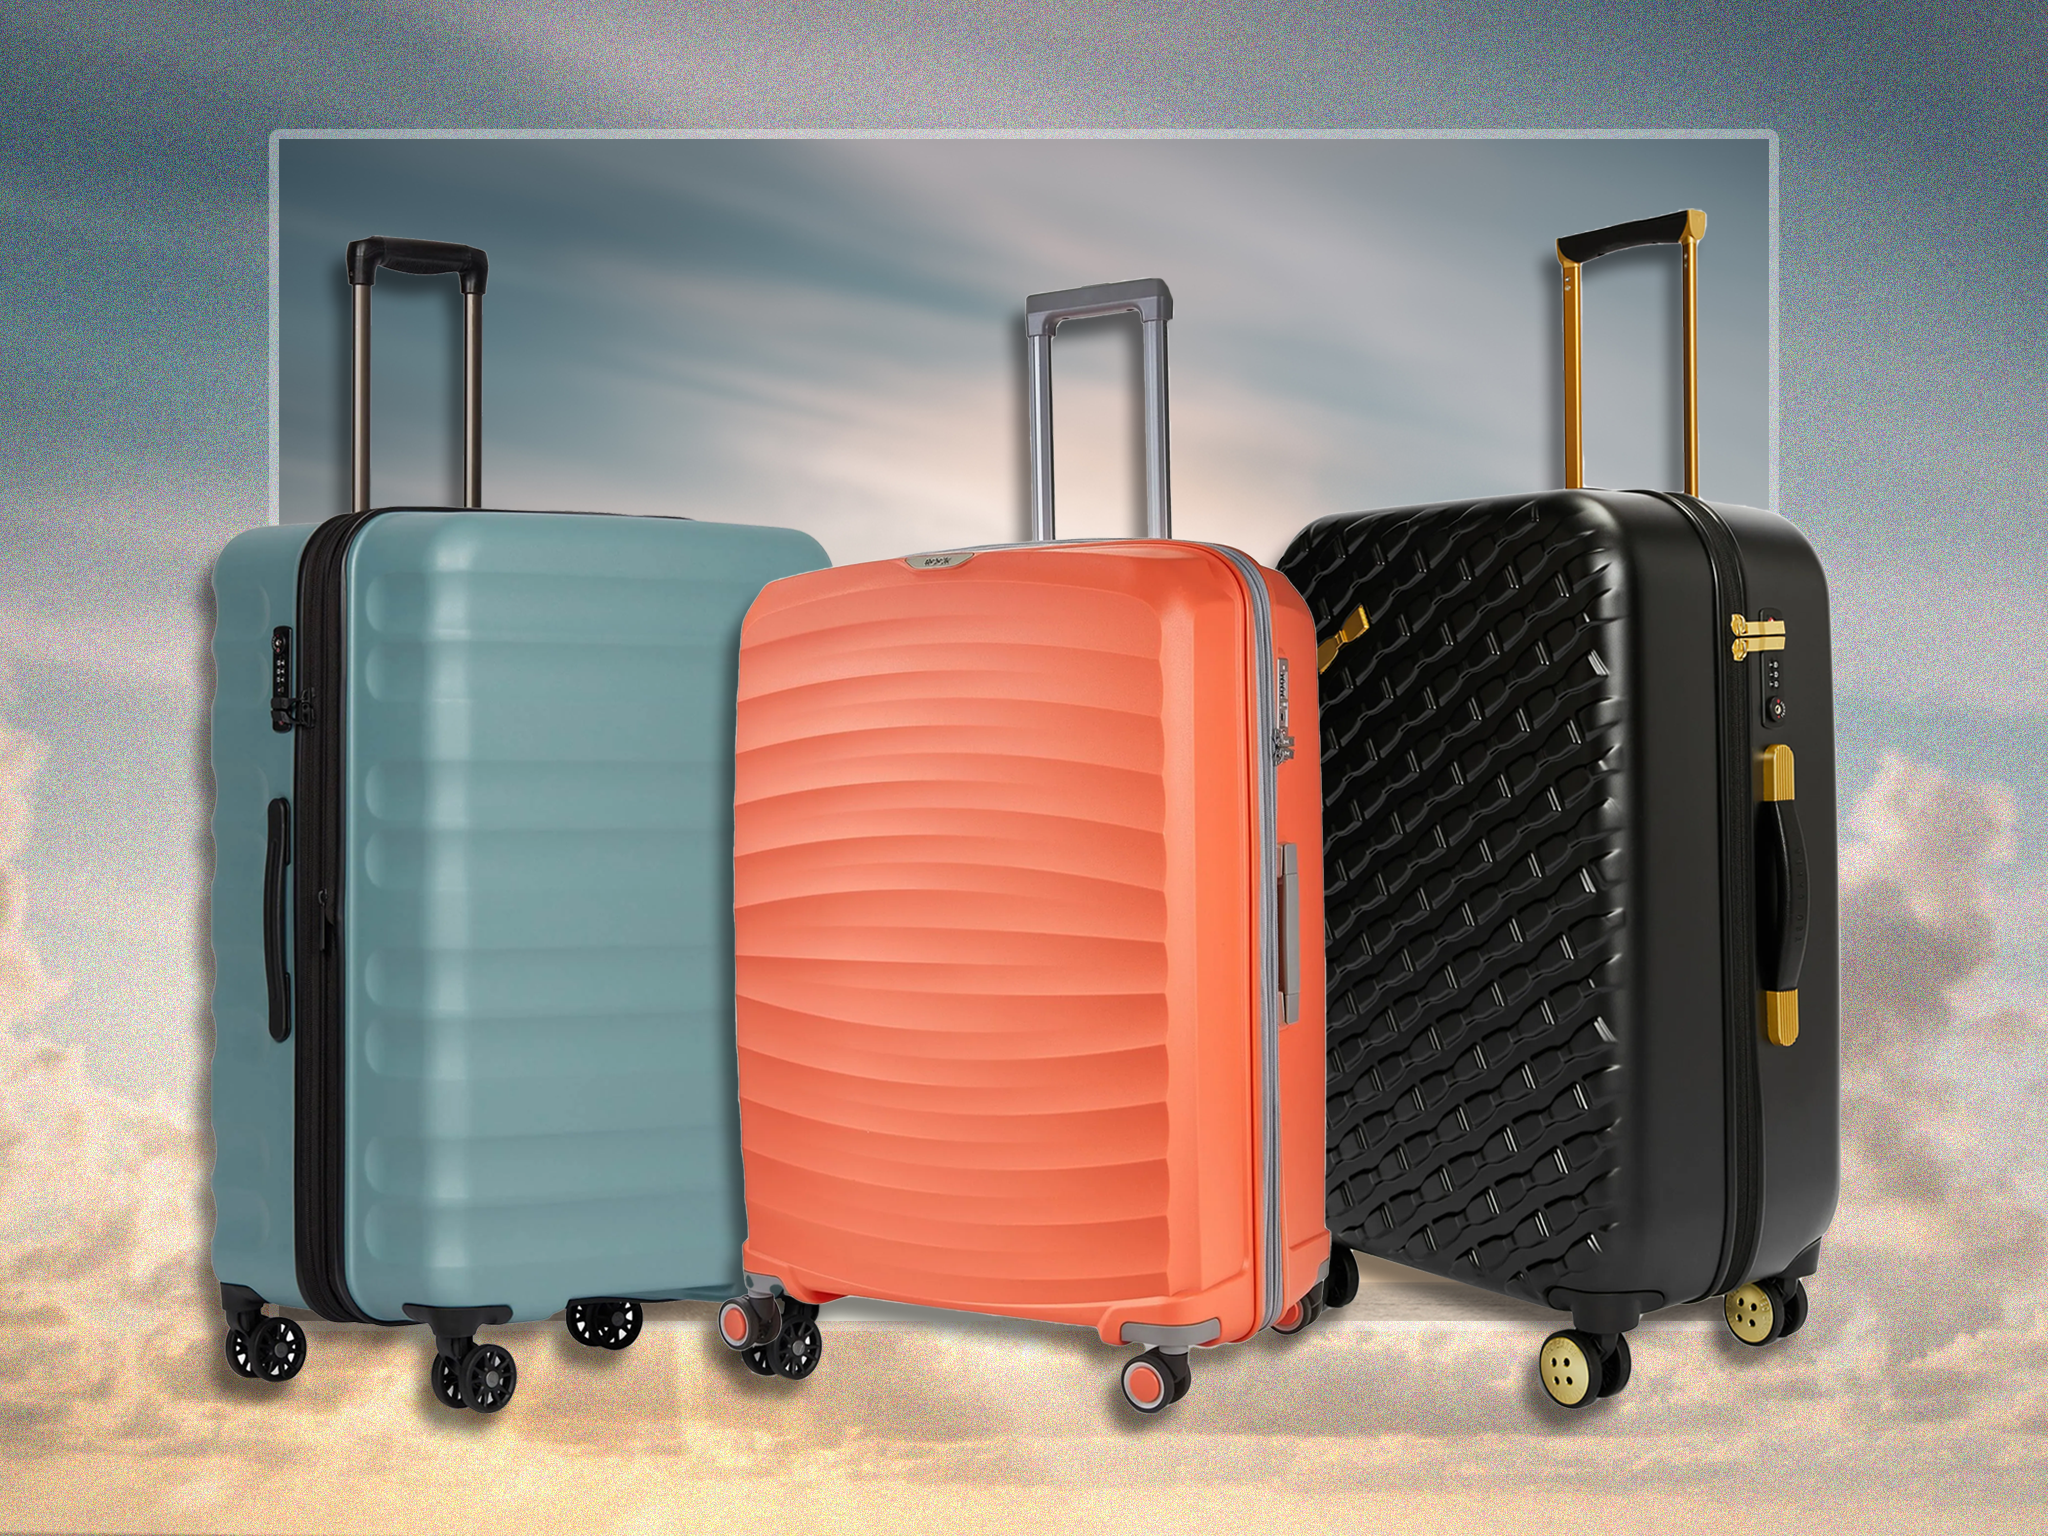 <p>Used in cars and as overhead luggage, we even filled these way past their recommended capacity to really put them through their paces </p>